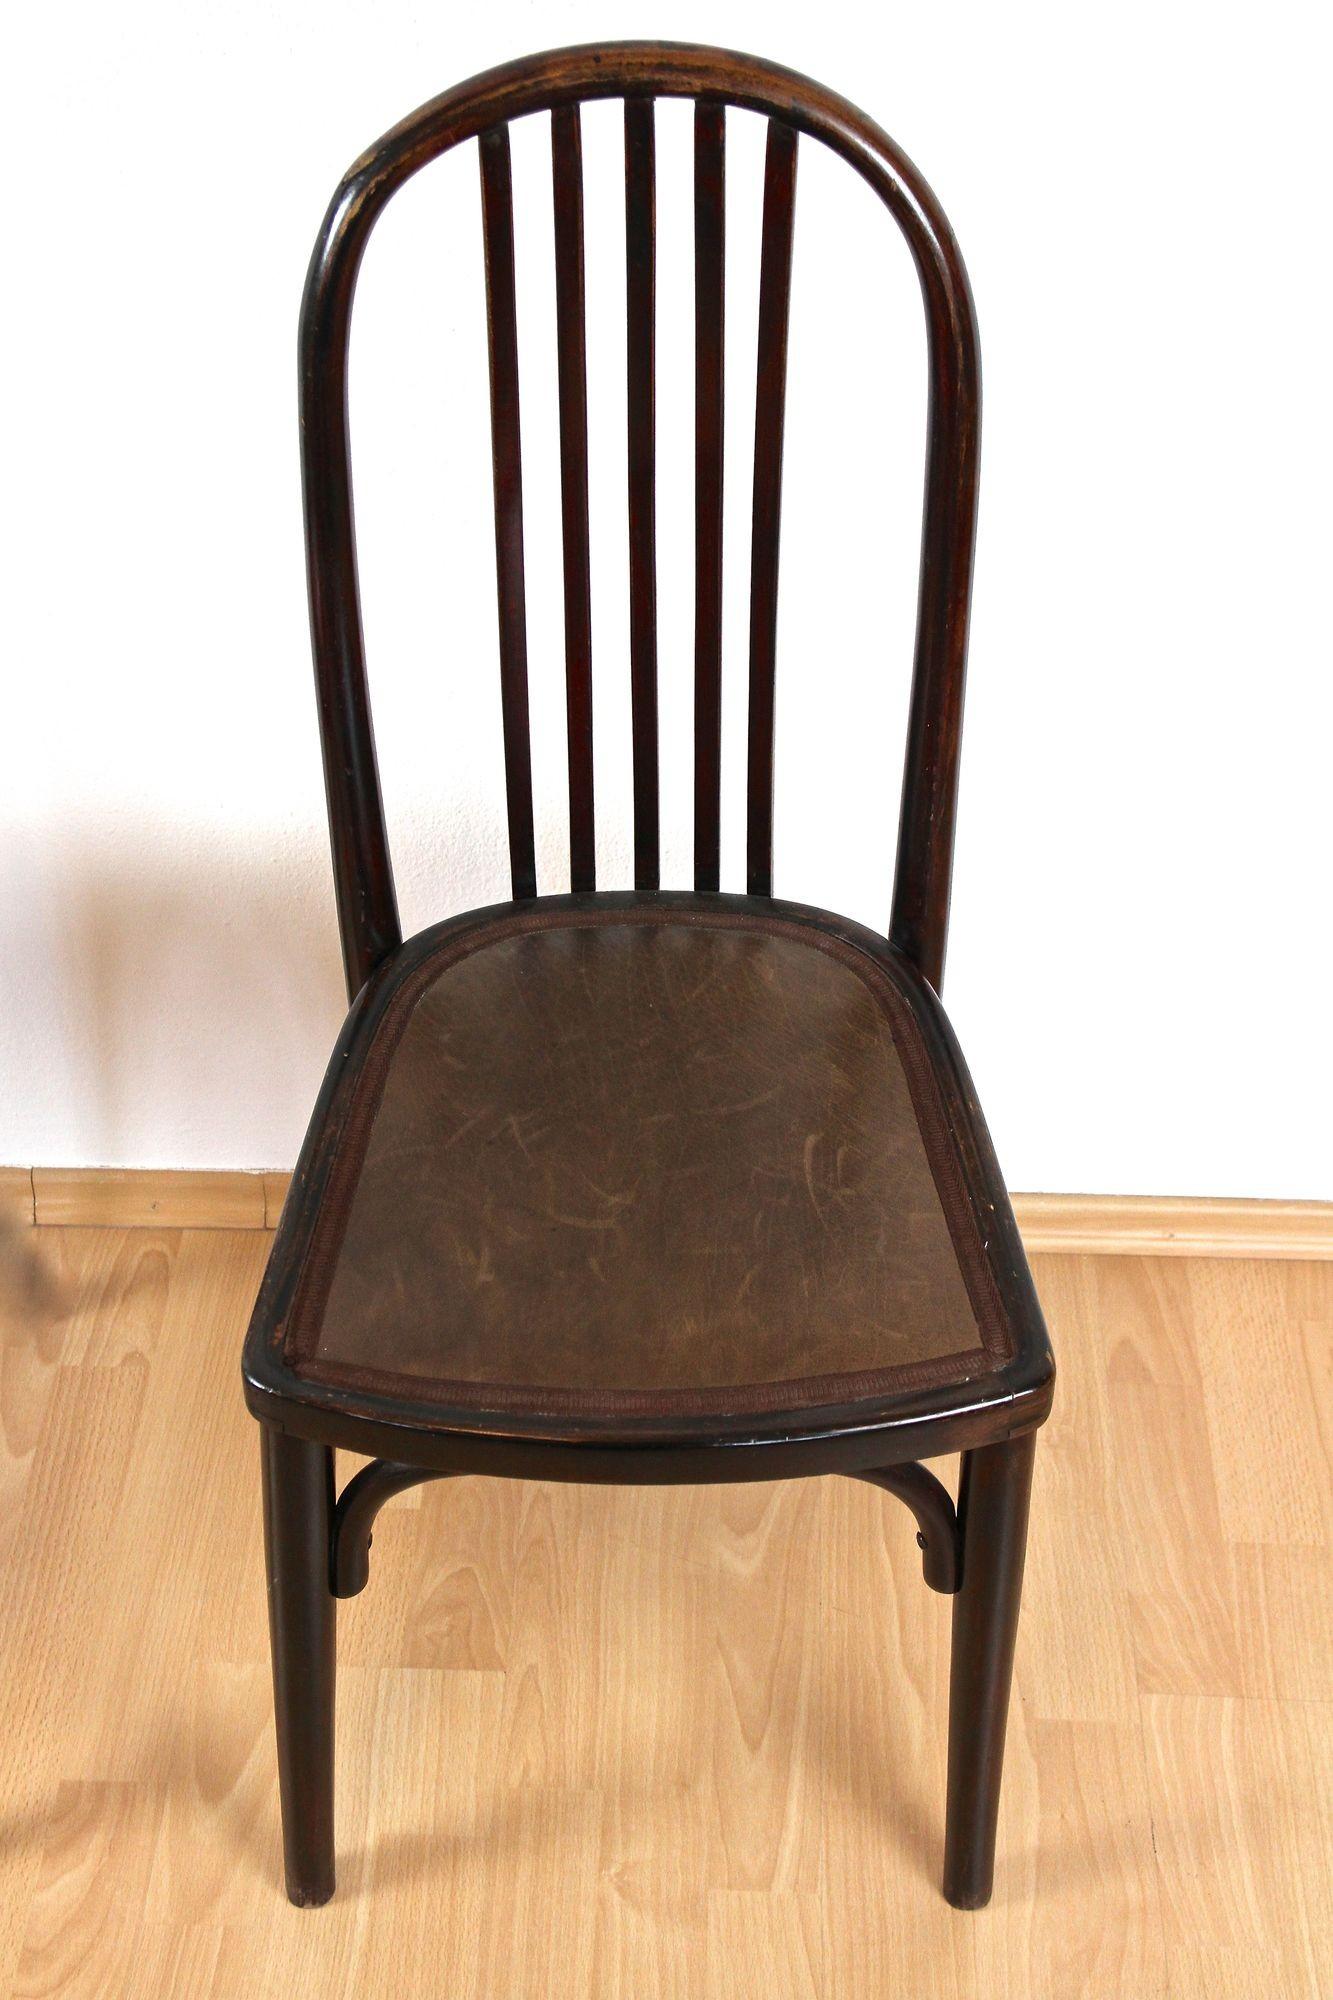 Polished Pair Of Art Nouveau Thonet Chairs by Josef Hoffmann, 1st edition! - CZ ca. 1906 For Sale